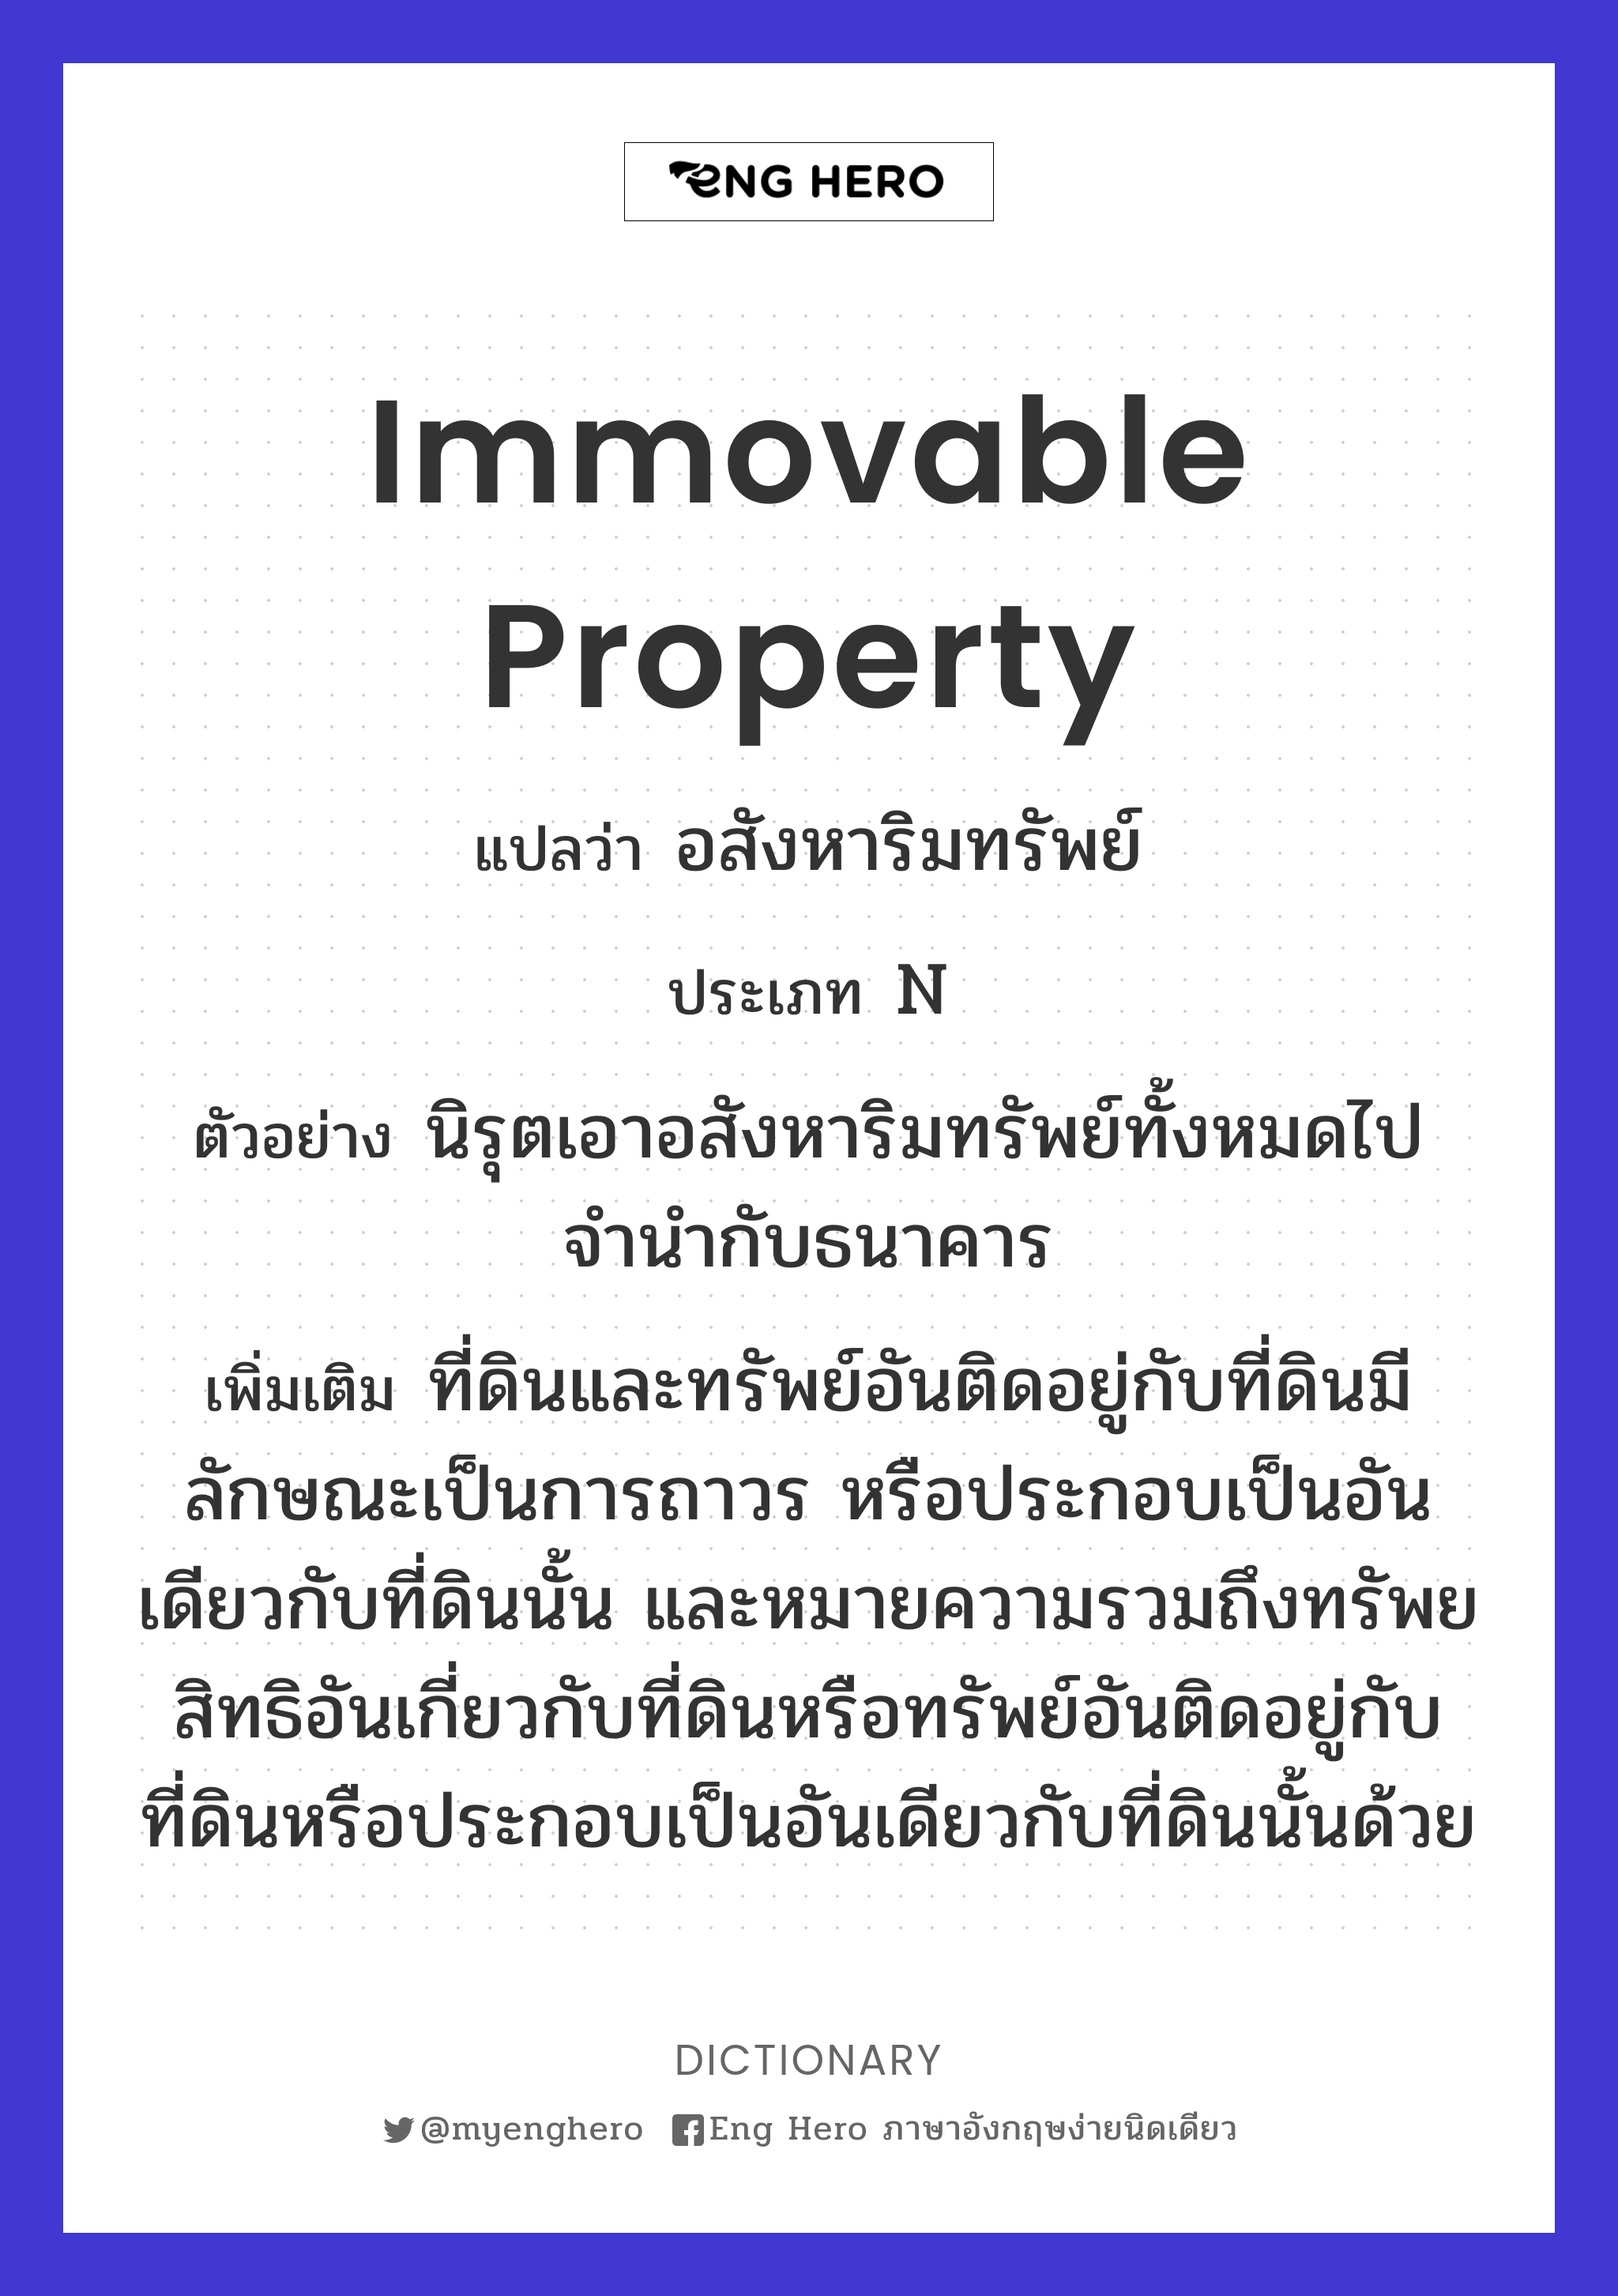 immovable property